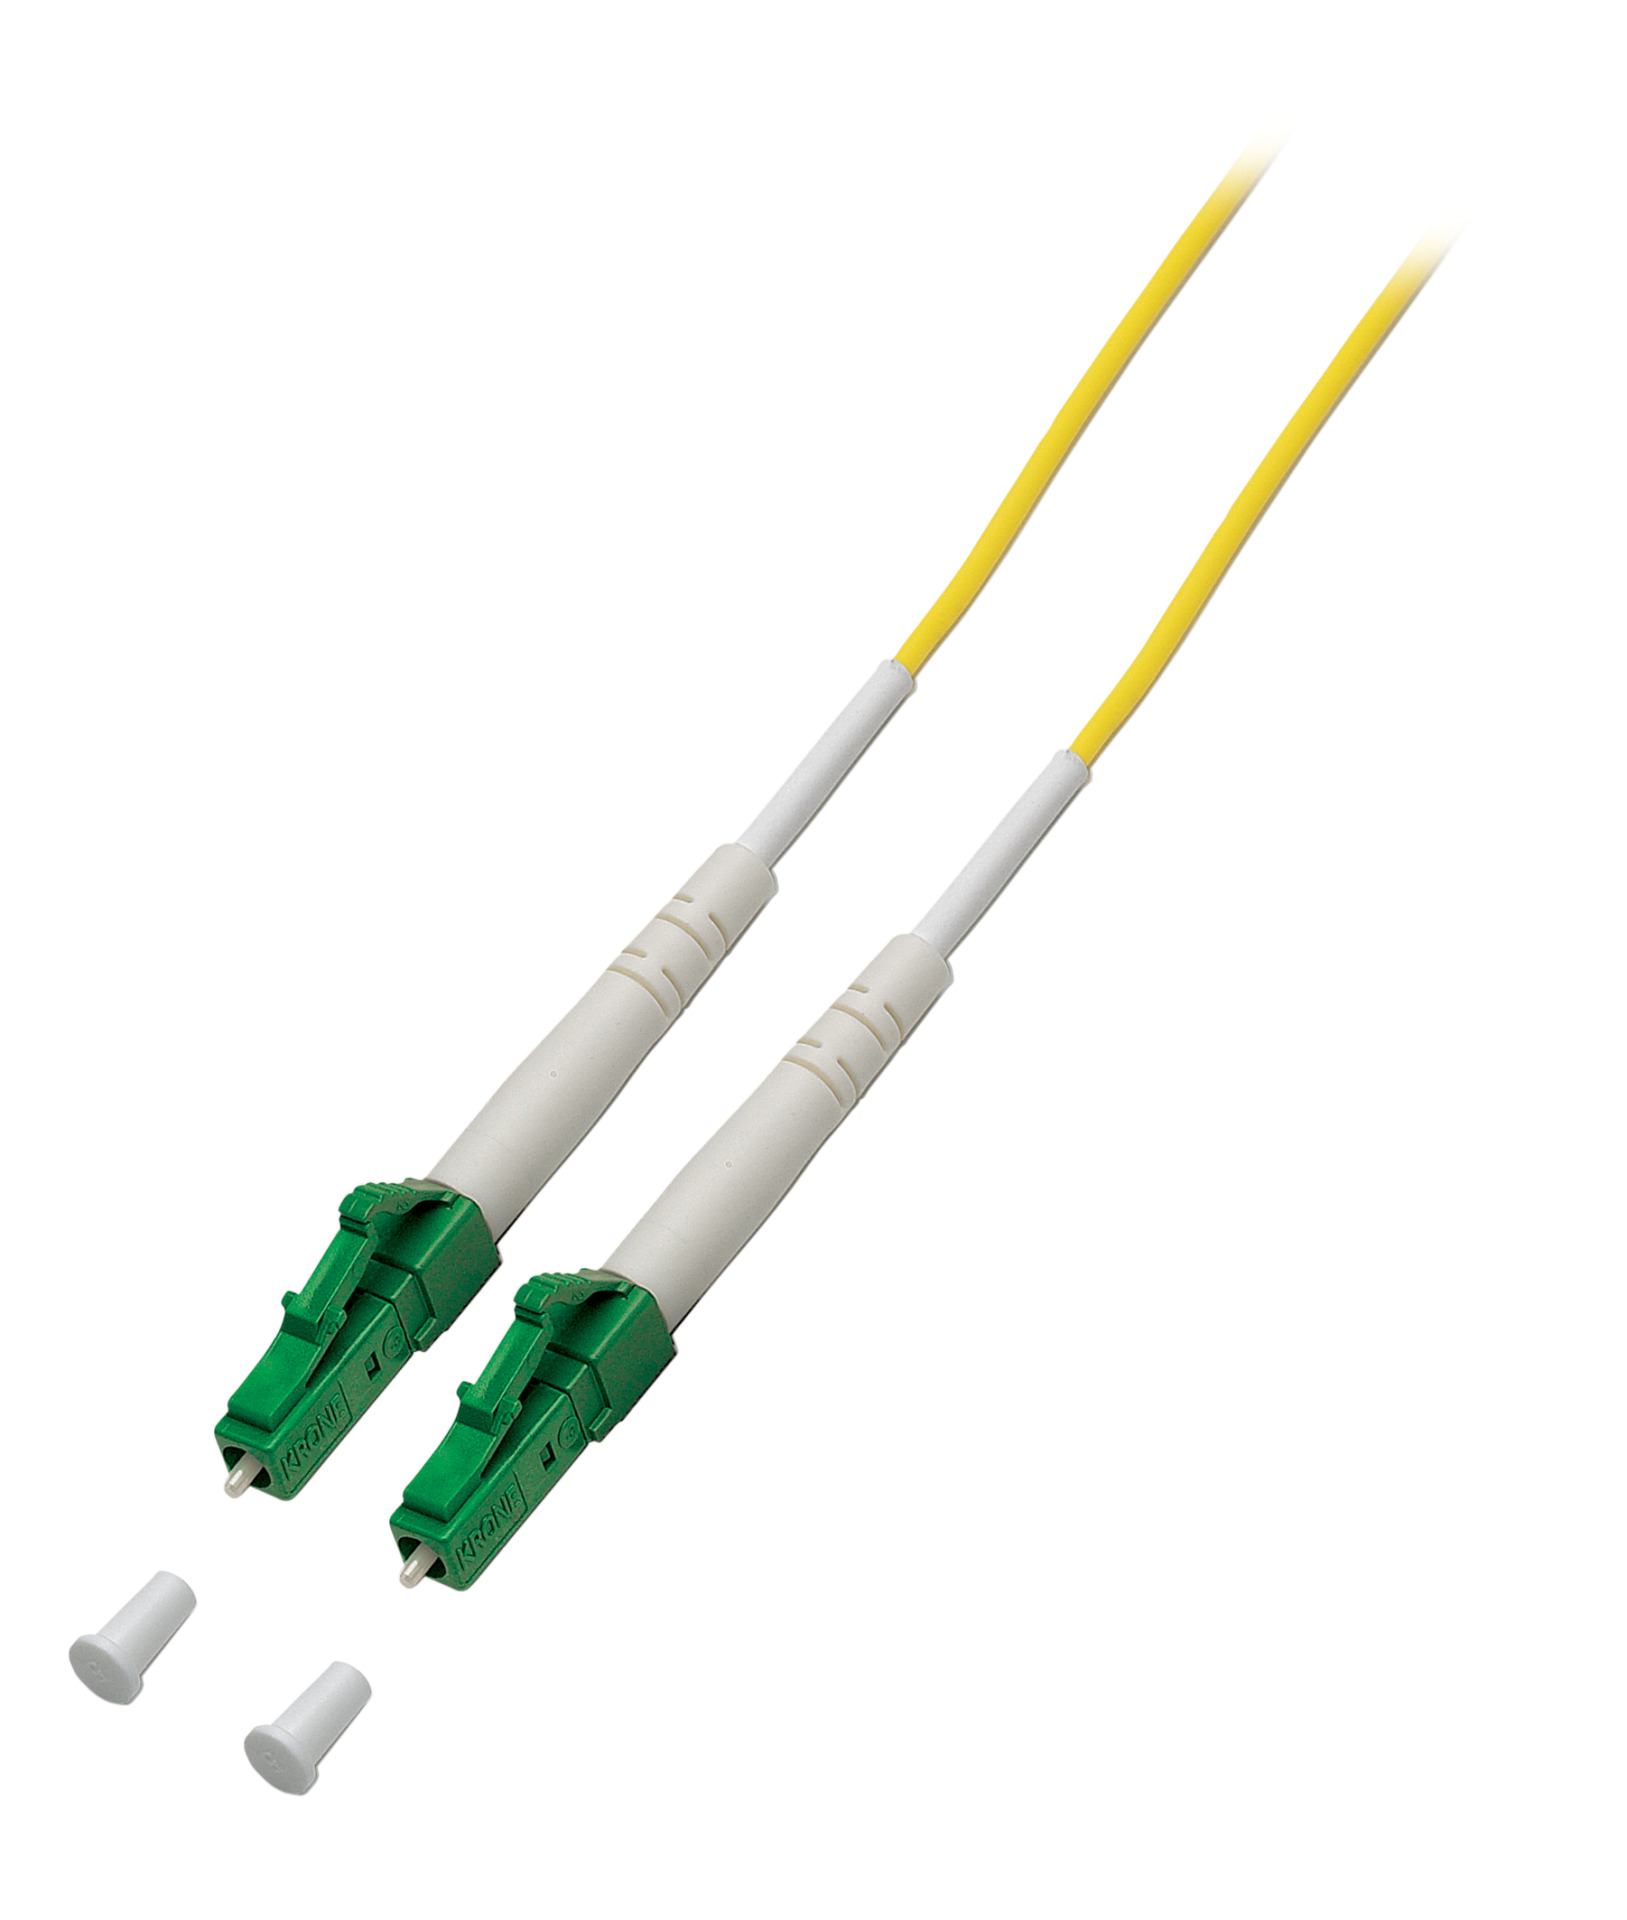 Simplex FO Patch Cable LC/APC-LC/APC G657.A2 10m 3,0mm yellow 9/125µm